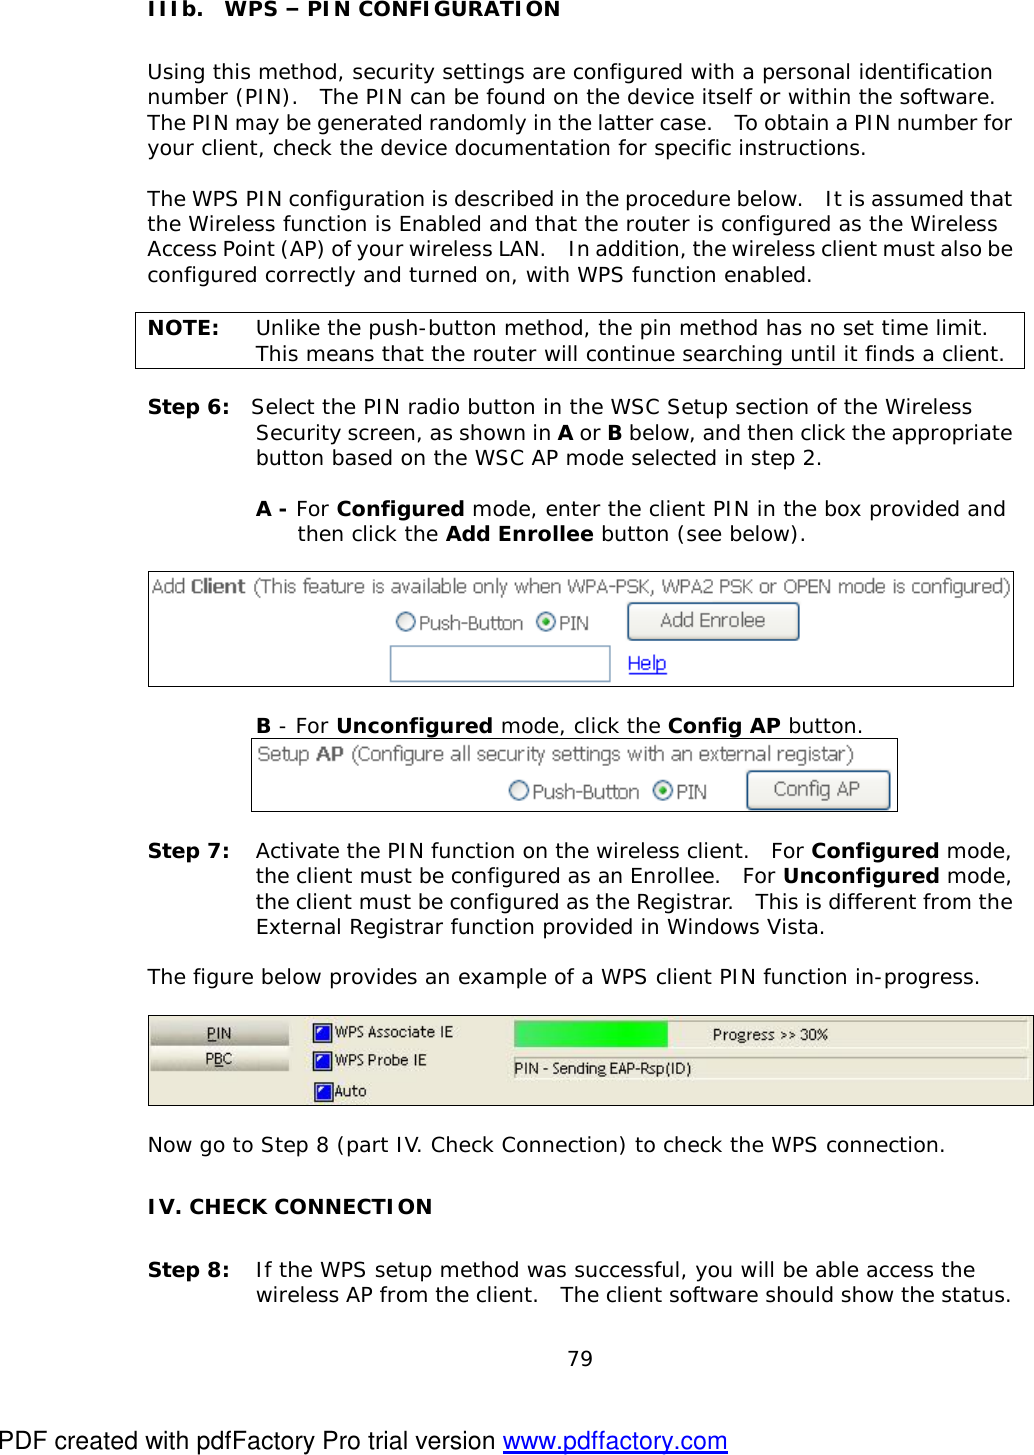  79   IIIb.  WPS – PIN CONFIGURATION Using this method, security settings are configured with a personal identification number (PIN).  The PIN can be found on the device itself or within the software.  The PIN may be generated randomly in the latter case.  To obtain a PIN number for your client, check the device documentation for specific instructions.  The WPS PIN configuration is described in the procedure below.  It is assumed that the Wireless function is Enabled and that the router is configured as the Wireless Access Point (AP) of your wireless LAN.  In addition, the wireless client must also be configured correctly and turned on, with WPS function enabled.  NOTE: Unlike the push-button method, the pin method has no set time limit.  This means that the router will continue searching until it finds a client.  Step 6:  Select the PIN radio button in the WSC Setup section of the Wireless Security screen, as shown in A or B below, and then click the appropriate button based on the WSC AP mode selected in step 2.   A - For Configured mode, enter the client PIN in the box provided and  then click the Add Enrollee button (see below).     B - For Unconfigured mode, click the Config AP button.      Step 7: Activate the PIN function on the wireless client.  For Configured mode, the client must be configured as an Enrollee.  For Unconfigured mode, the client must be configured as the Registrar.  This is different from the External Registrar function provided in Windows Vista.     The figure below provides an example of a WPS client PIN function in-progress.    Now go to Step 8 (part IV. Check Connection) to check the WPS connection. IV. CHECK CONNECTION Step 8: If the WPS setup method was successful, you will be able access the wireless AP from the client.  The client software should show the status.  PDF created with pdfFactory Pro trial version www.pdffactory.com